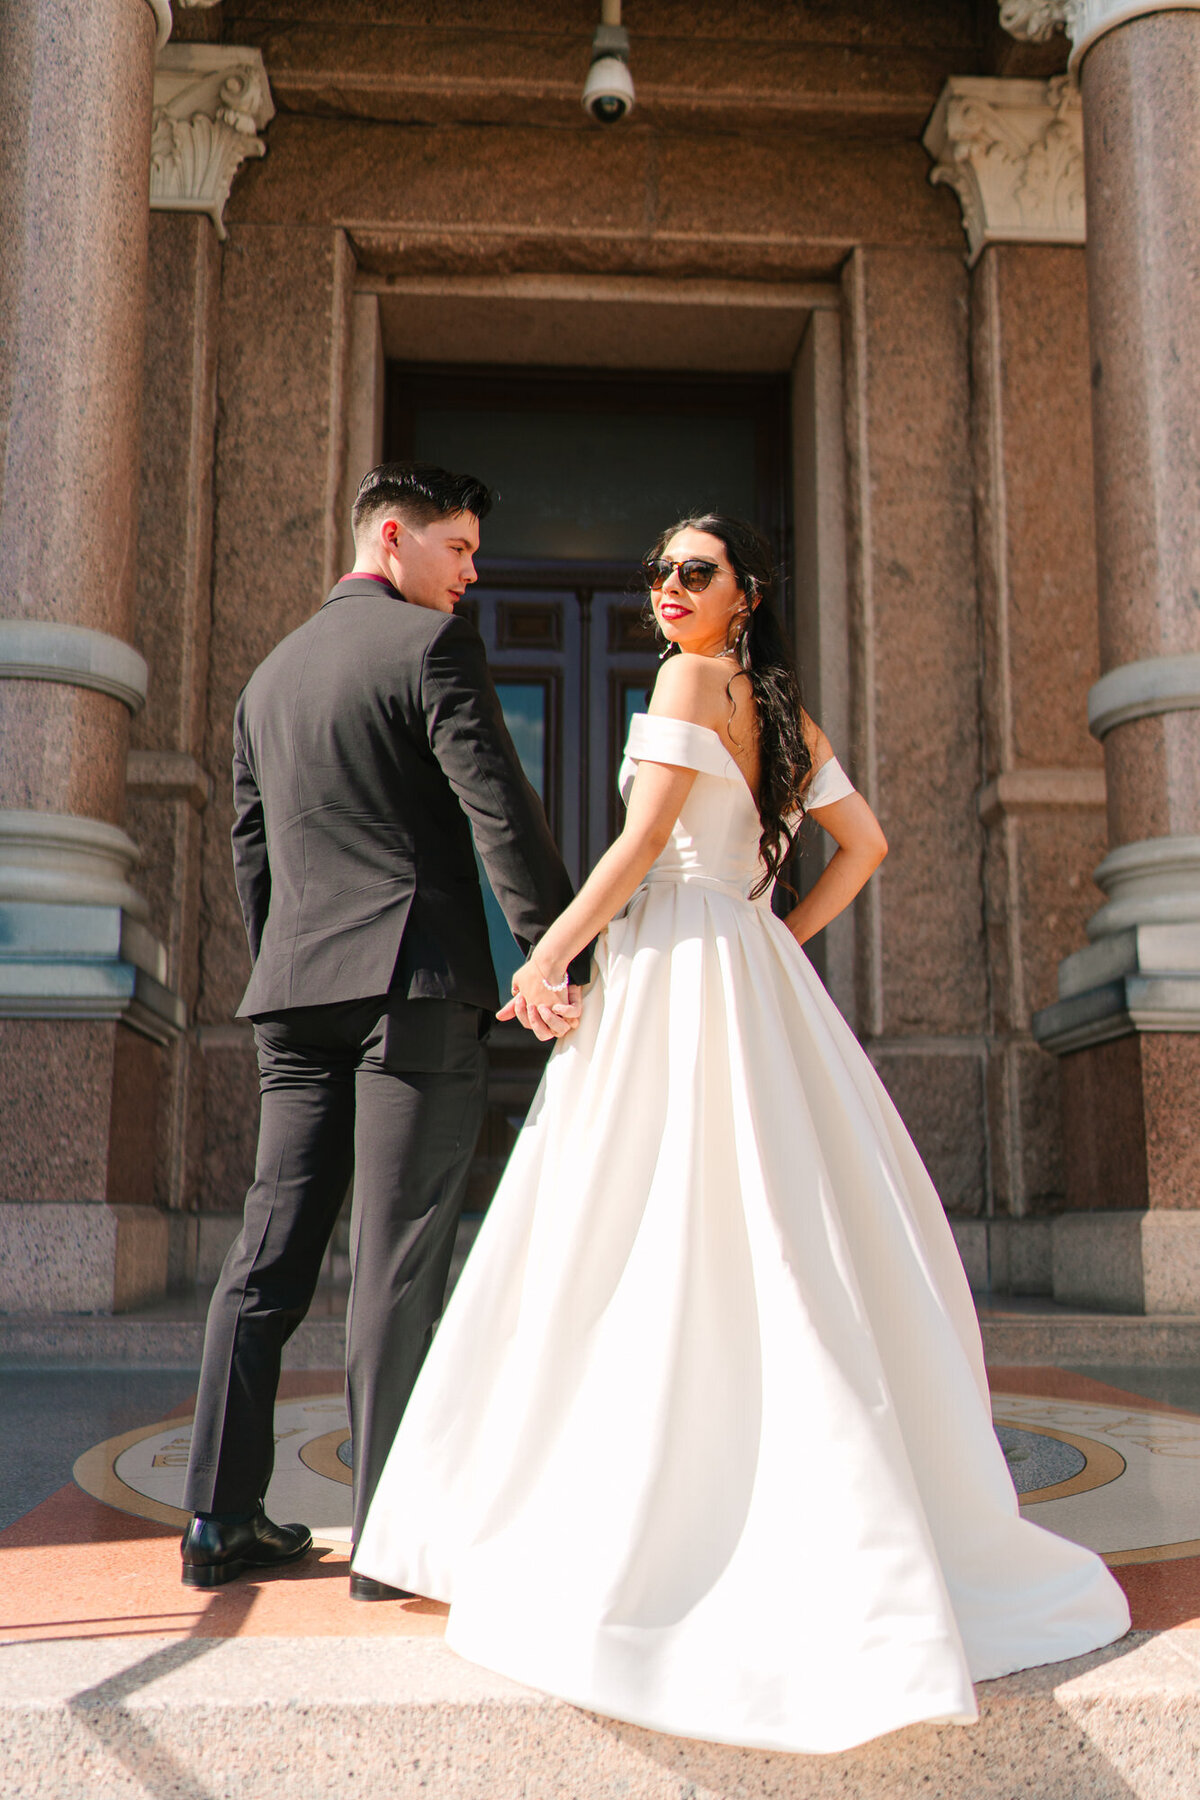 Married couple wedding shoot at the Capitol of Texas by Katy Rox Wedding photographer